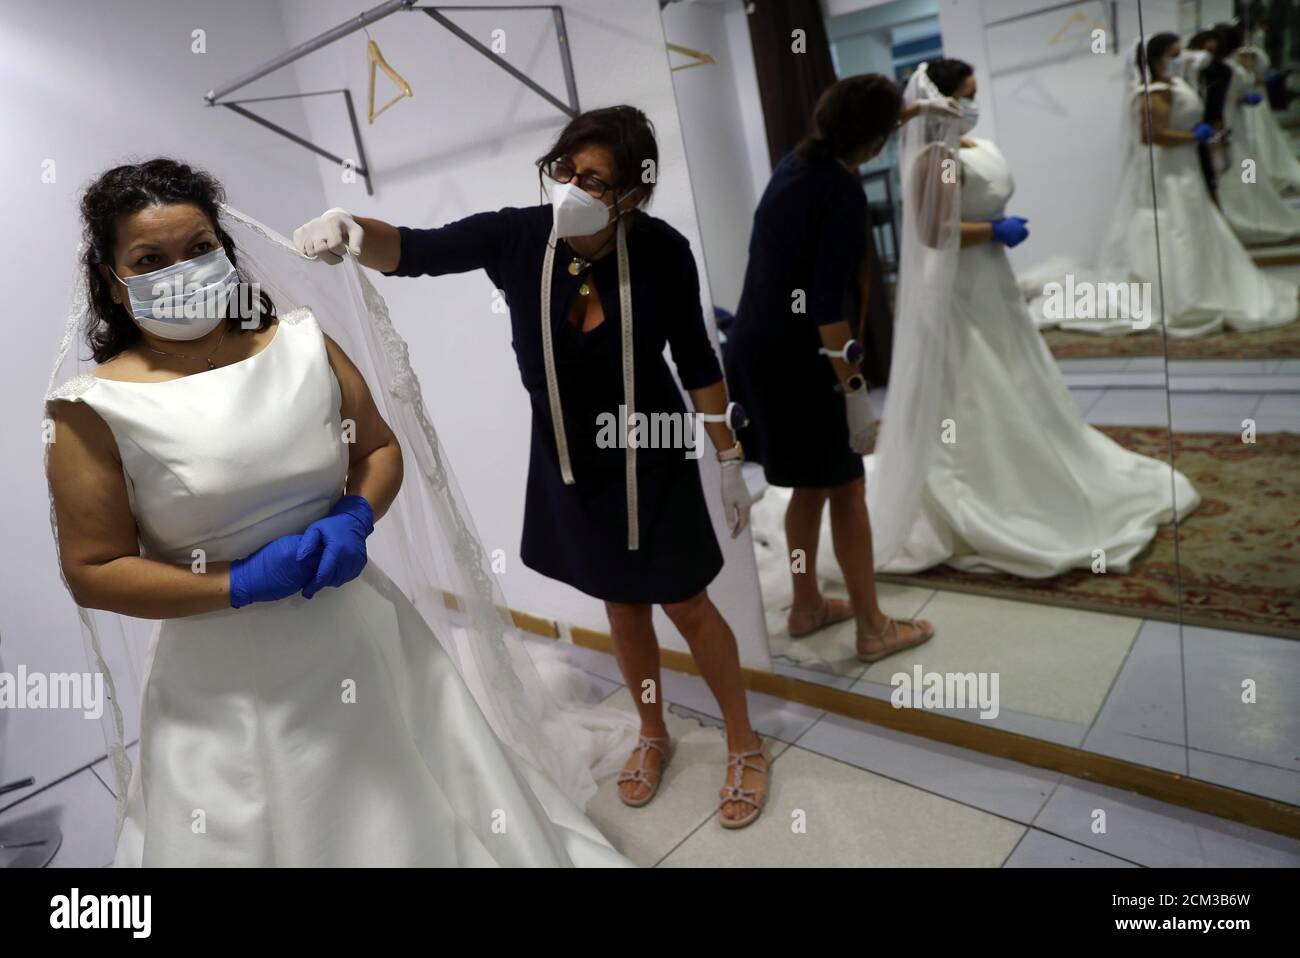 Olga Prades helps bride Isabel Jimenez try on a wedding dress, as they both  wear protection masks and gloves, at her bridal shop Innovias, on the first  day that some small businesses